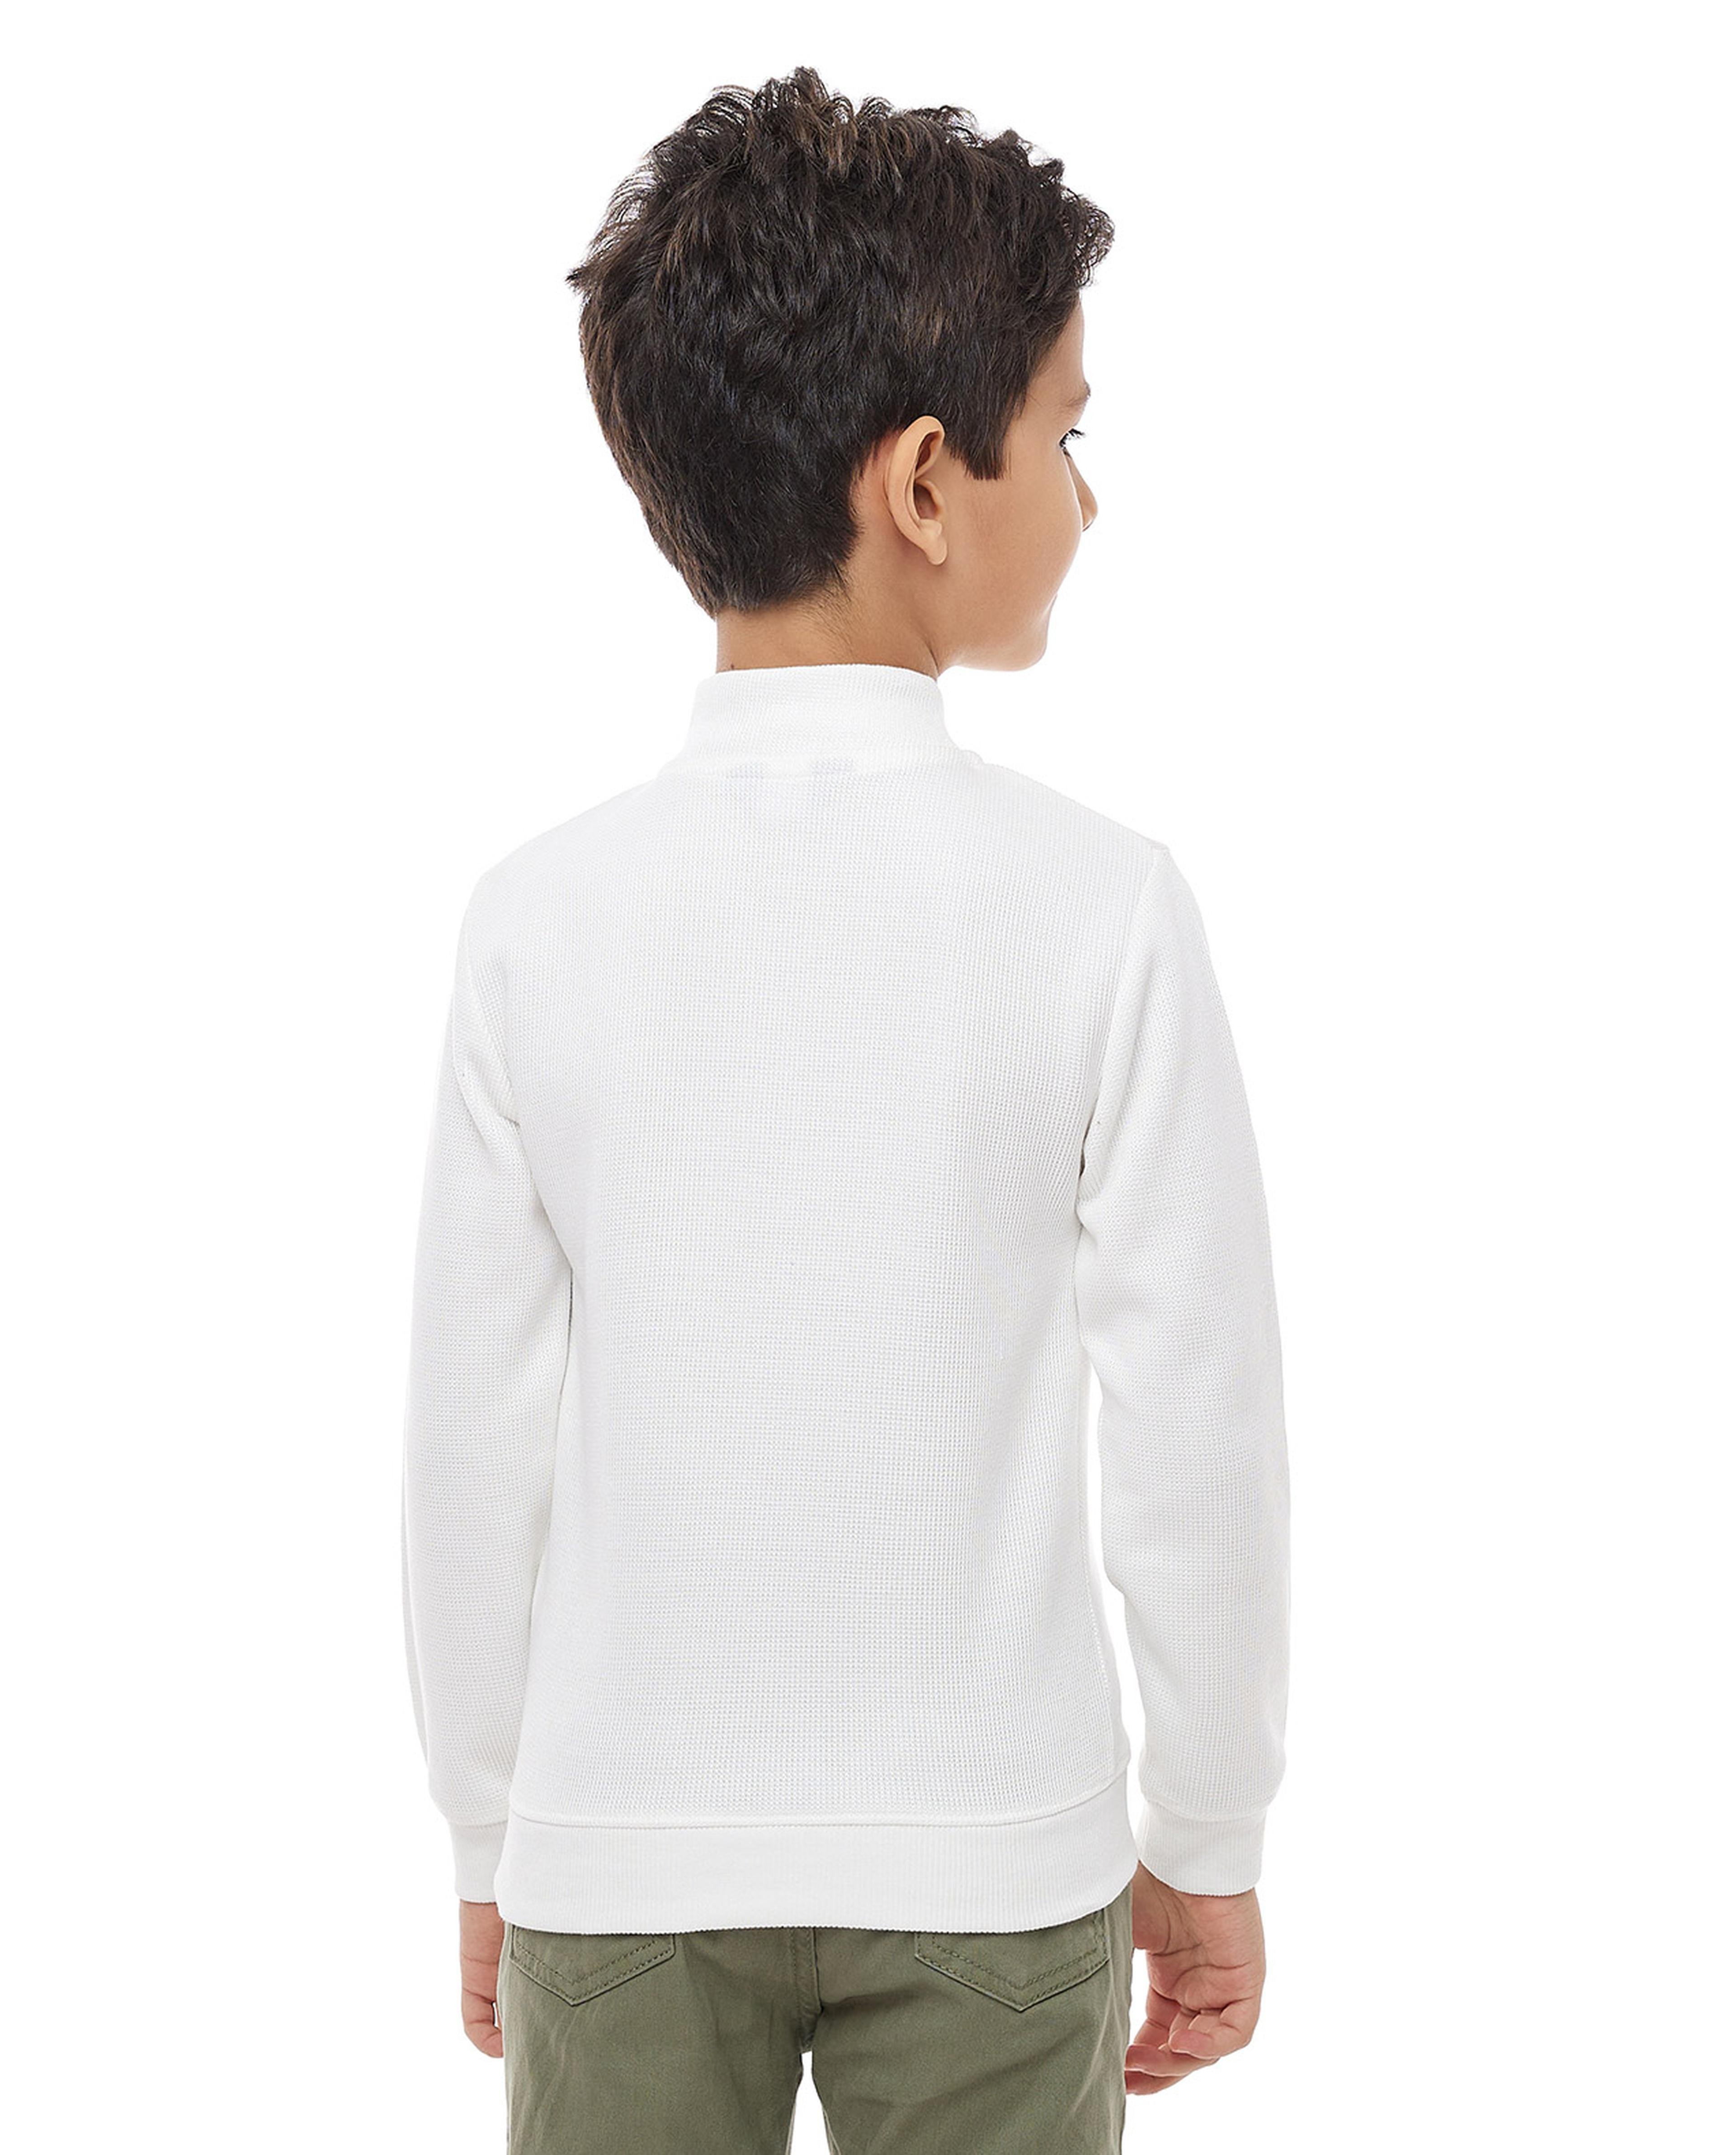 Embroidered Sweatshirt with High Neck and Long Sleeves